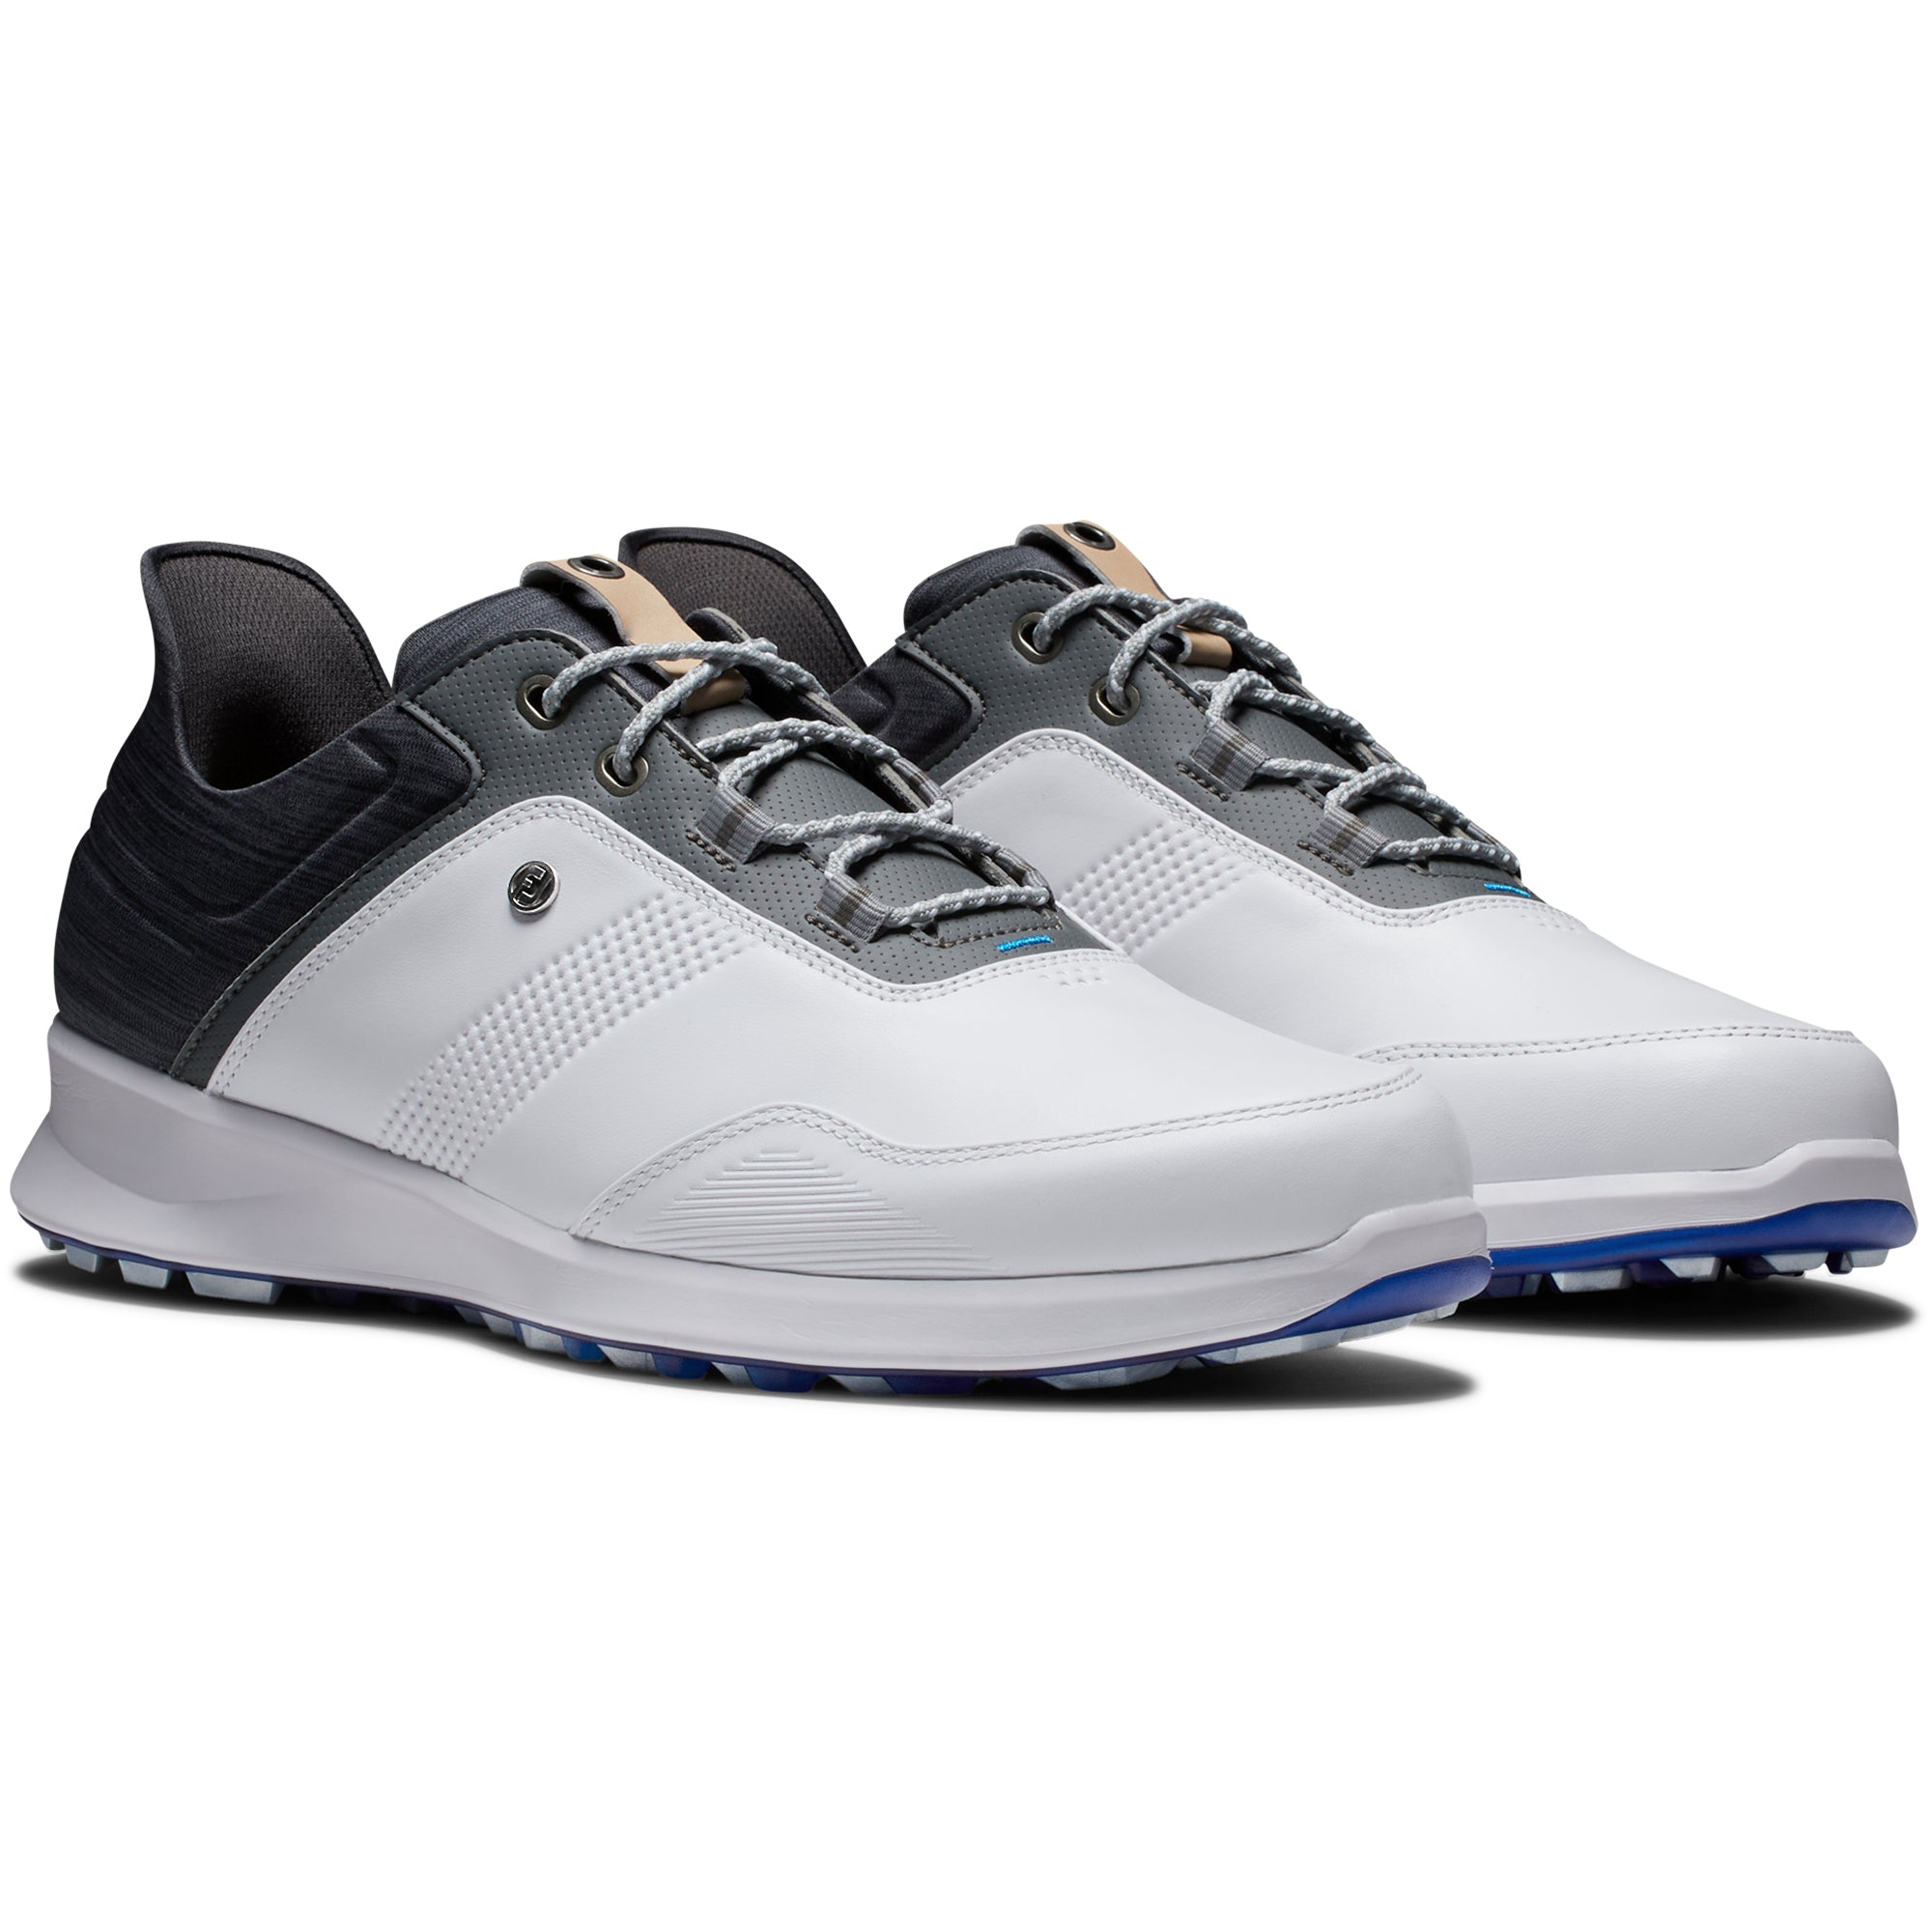 FootJoy Stratos Golf Shoes 50072 White Charcoal Blue Jay | Function18